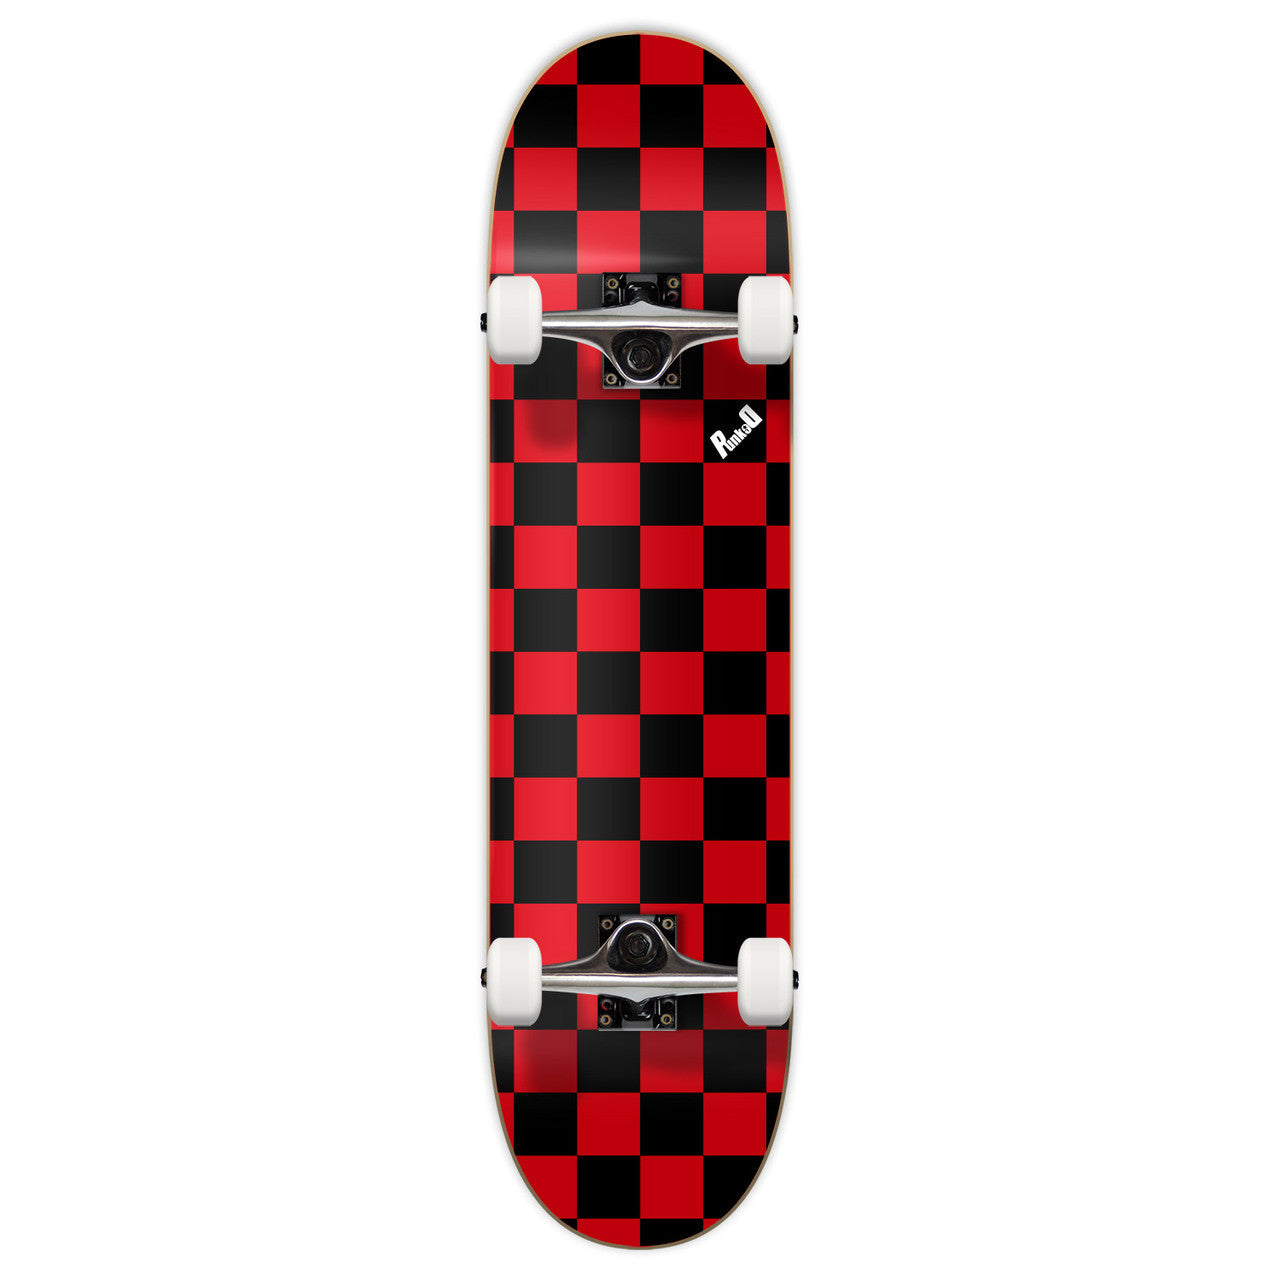 Yocaher Skateboard 7.75" Checker Red Complete